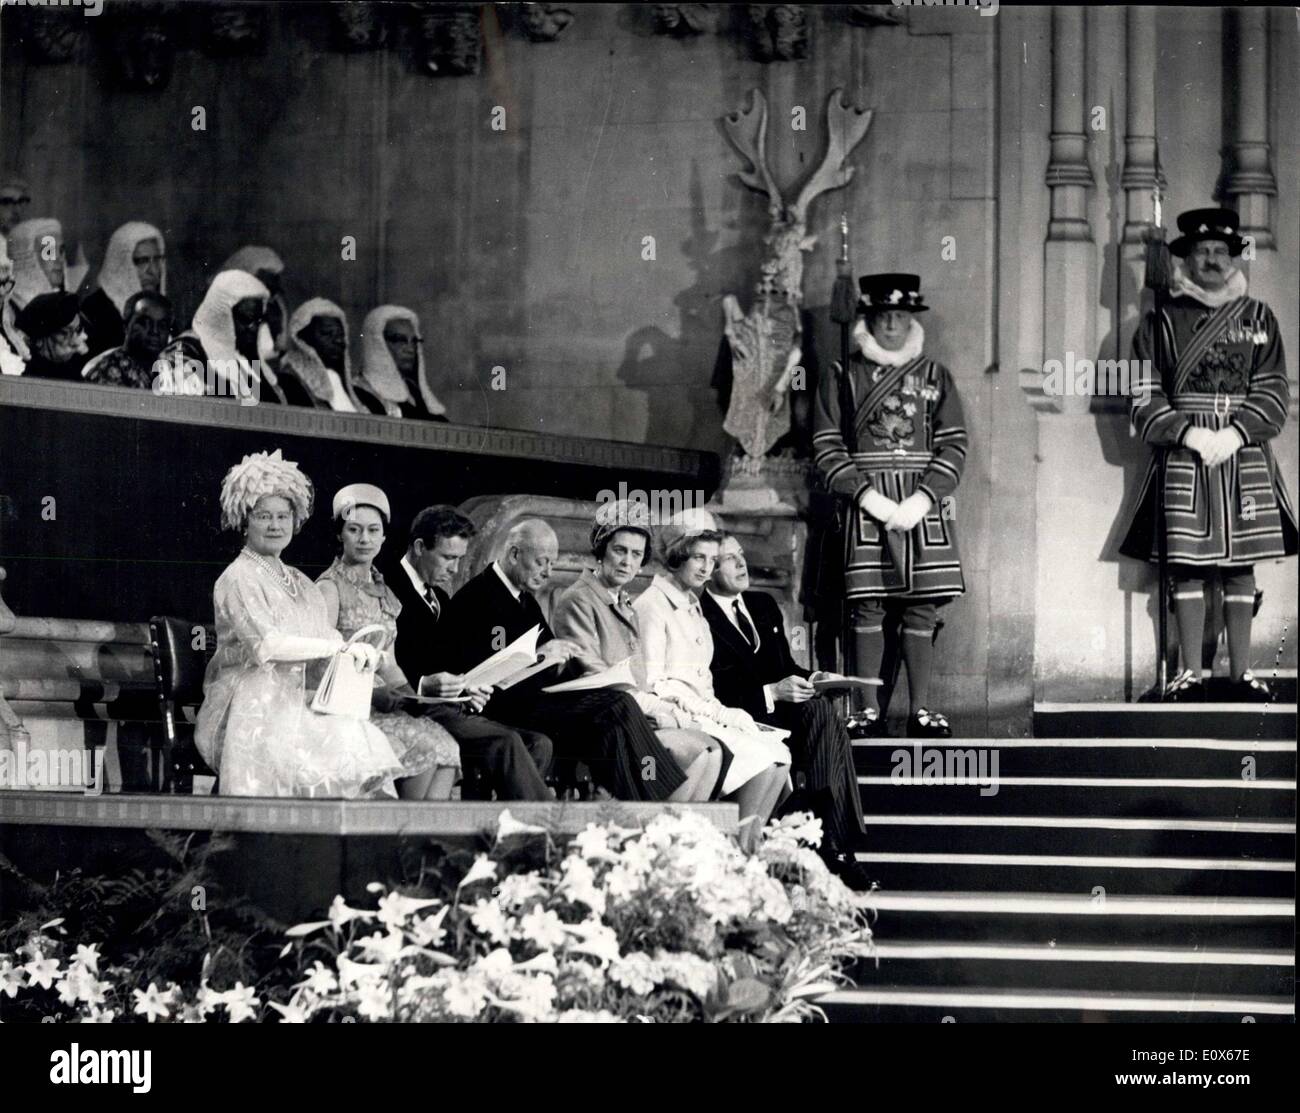 Jun. 22, 1965 - The Queen attends the 700th anniversary of Parliament: In the flower-decked Westminster Hall today H.M. The Queen, and other members of the Royal Family, attended a ceremony to mark the 700th anniversary of Parliament. Simon de Montfort, Earl of Leicester, convened the first Parliament which sat between 20th January and the end of March, 1265, in the Chapter House of Westminster. Photo shows the scene as Sir Harry Hylton-Foster, Speaker of the House of Commons, presents his speech to H.M Stock Photo